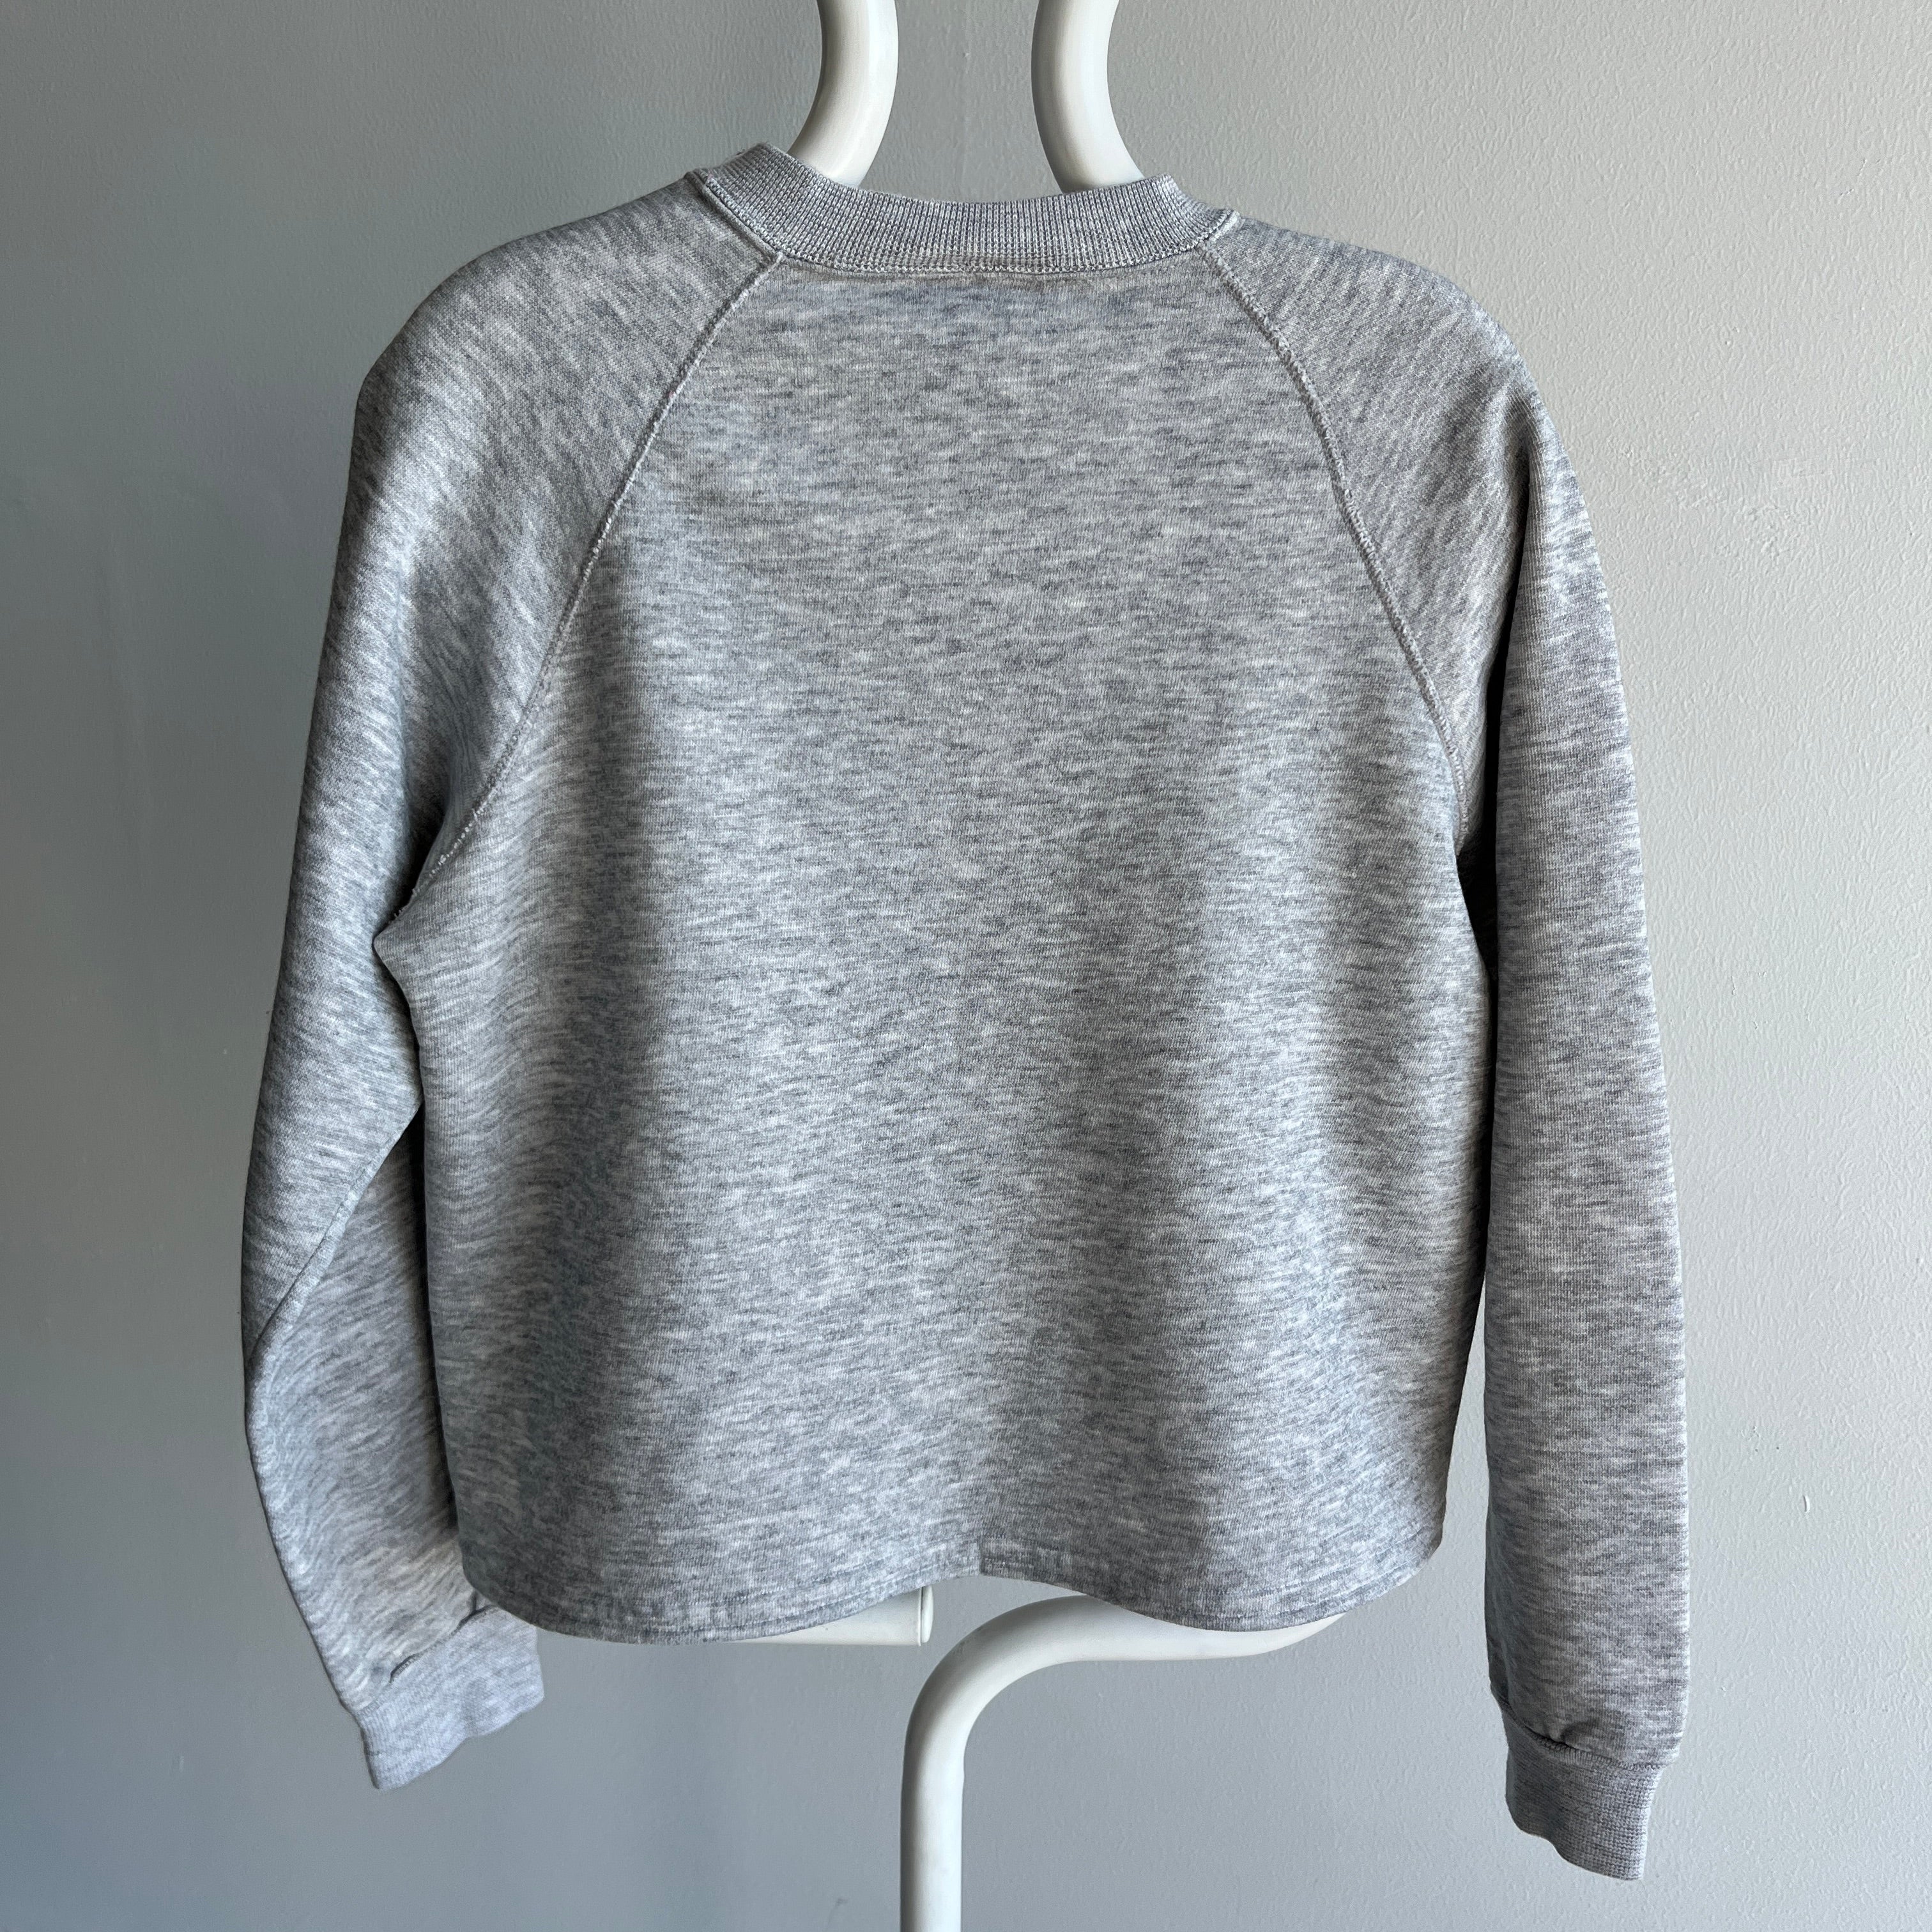 1980s DIY Goose Stitched Sweatshirt with an Interior Lace Hem